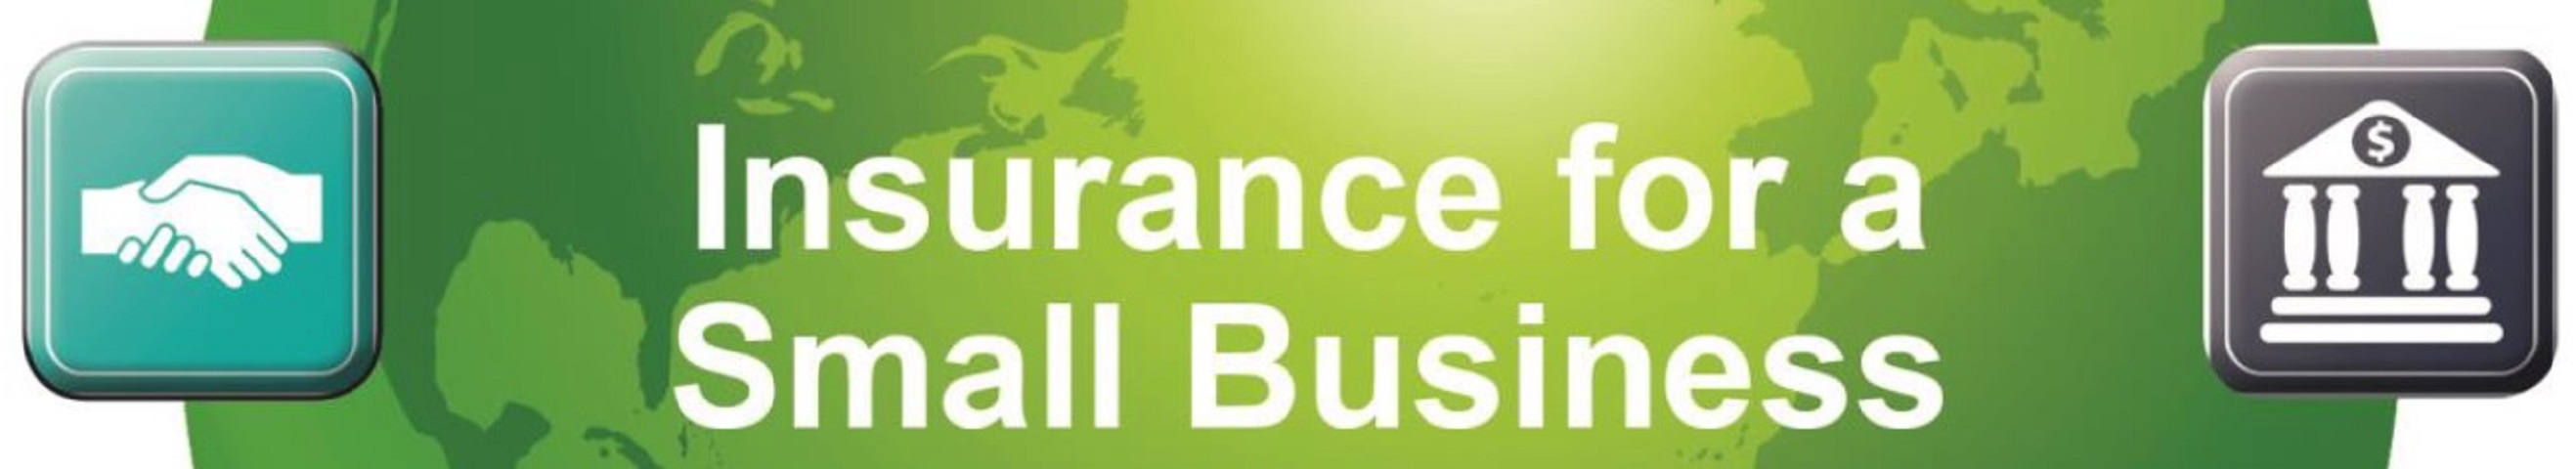 Insurance for a Small Business | Central California SBDC